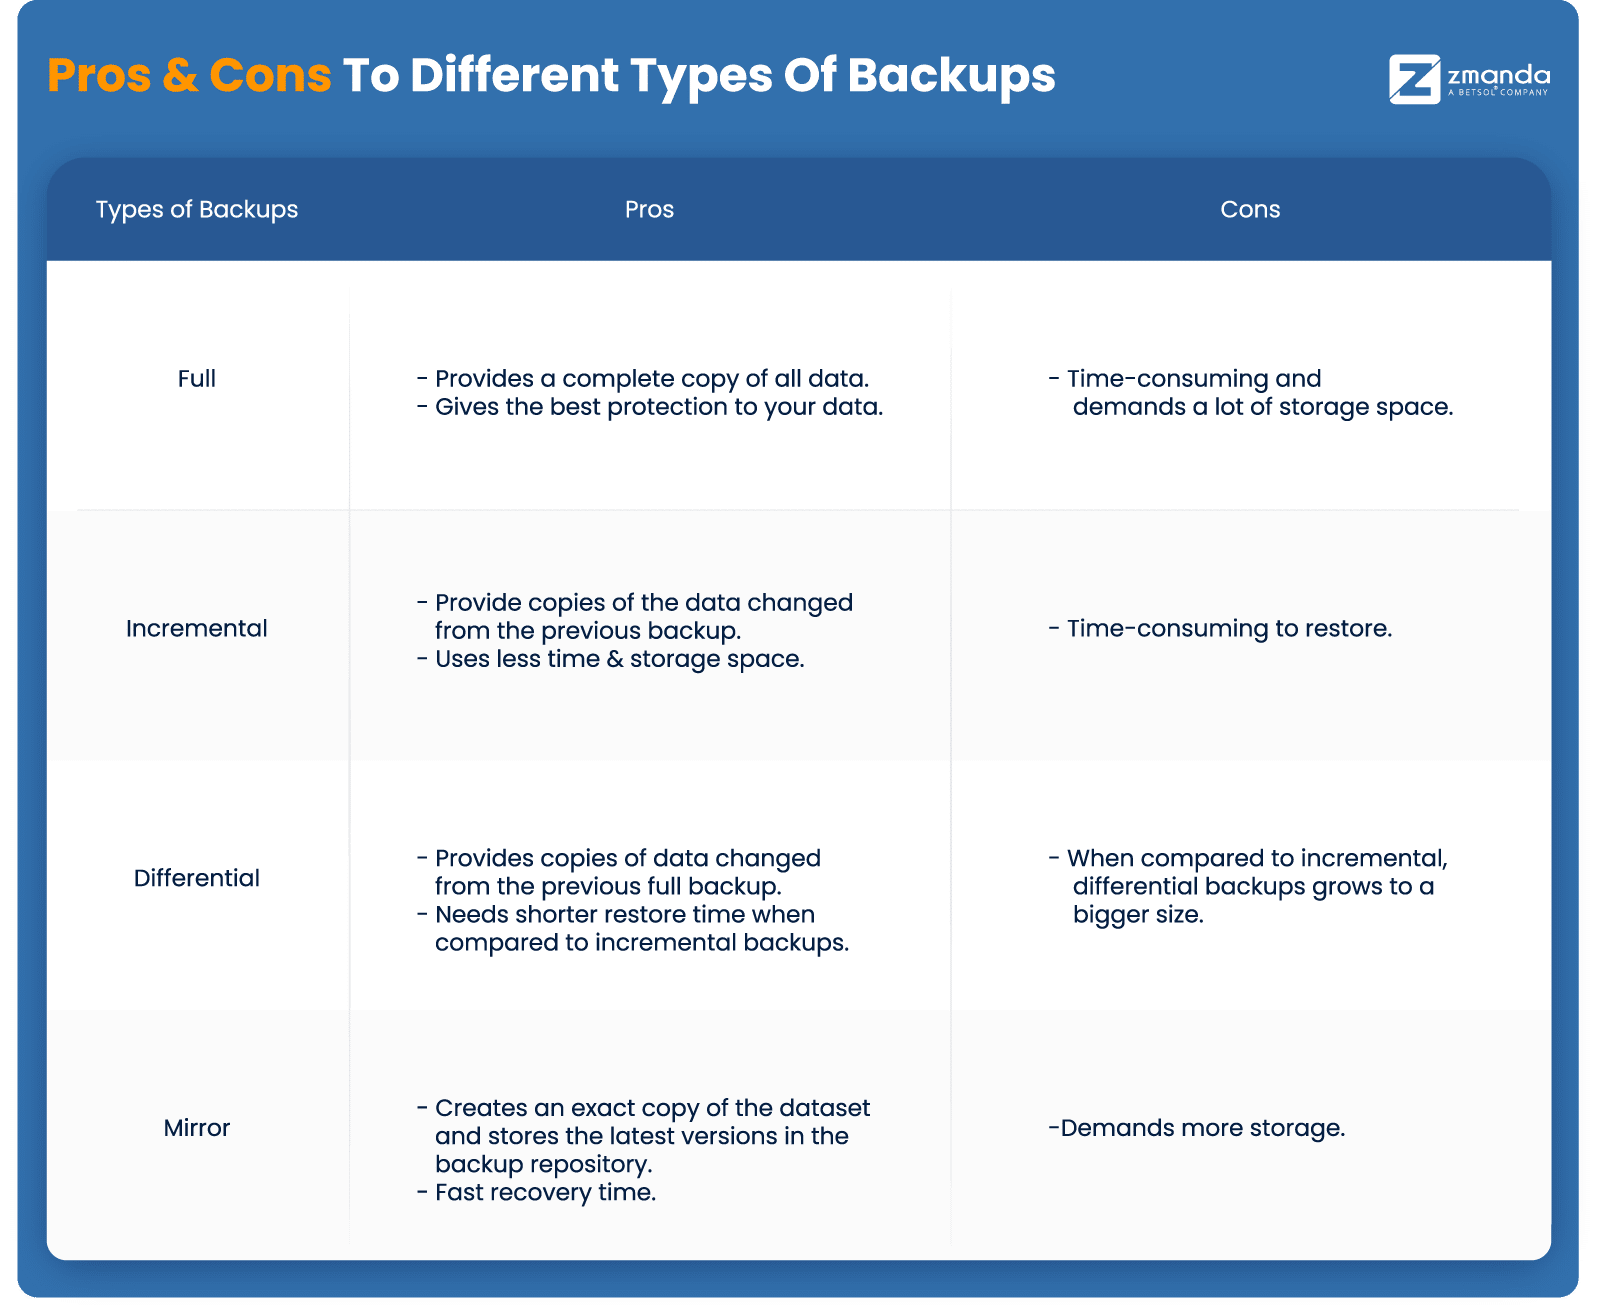 Pros and Cons to Different Types of Server Backups